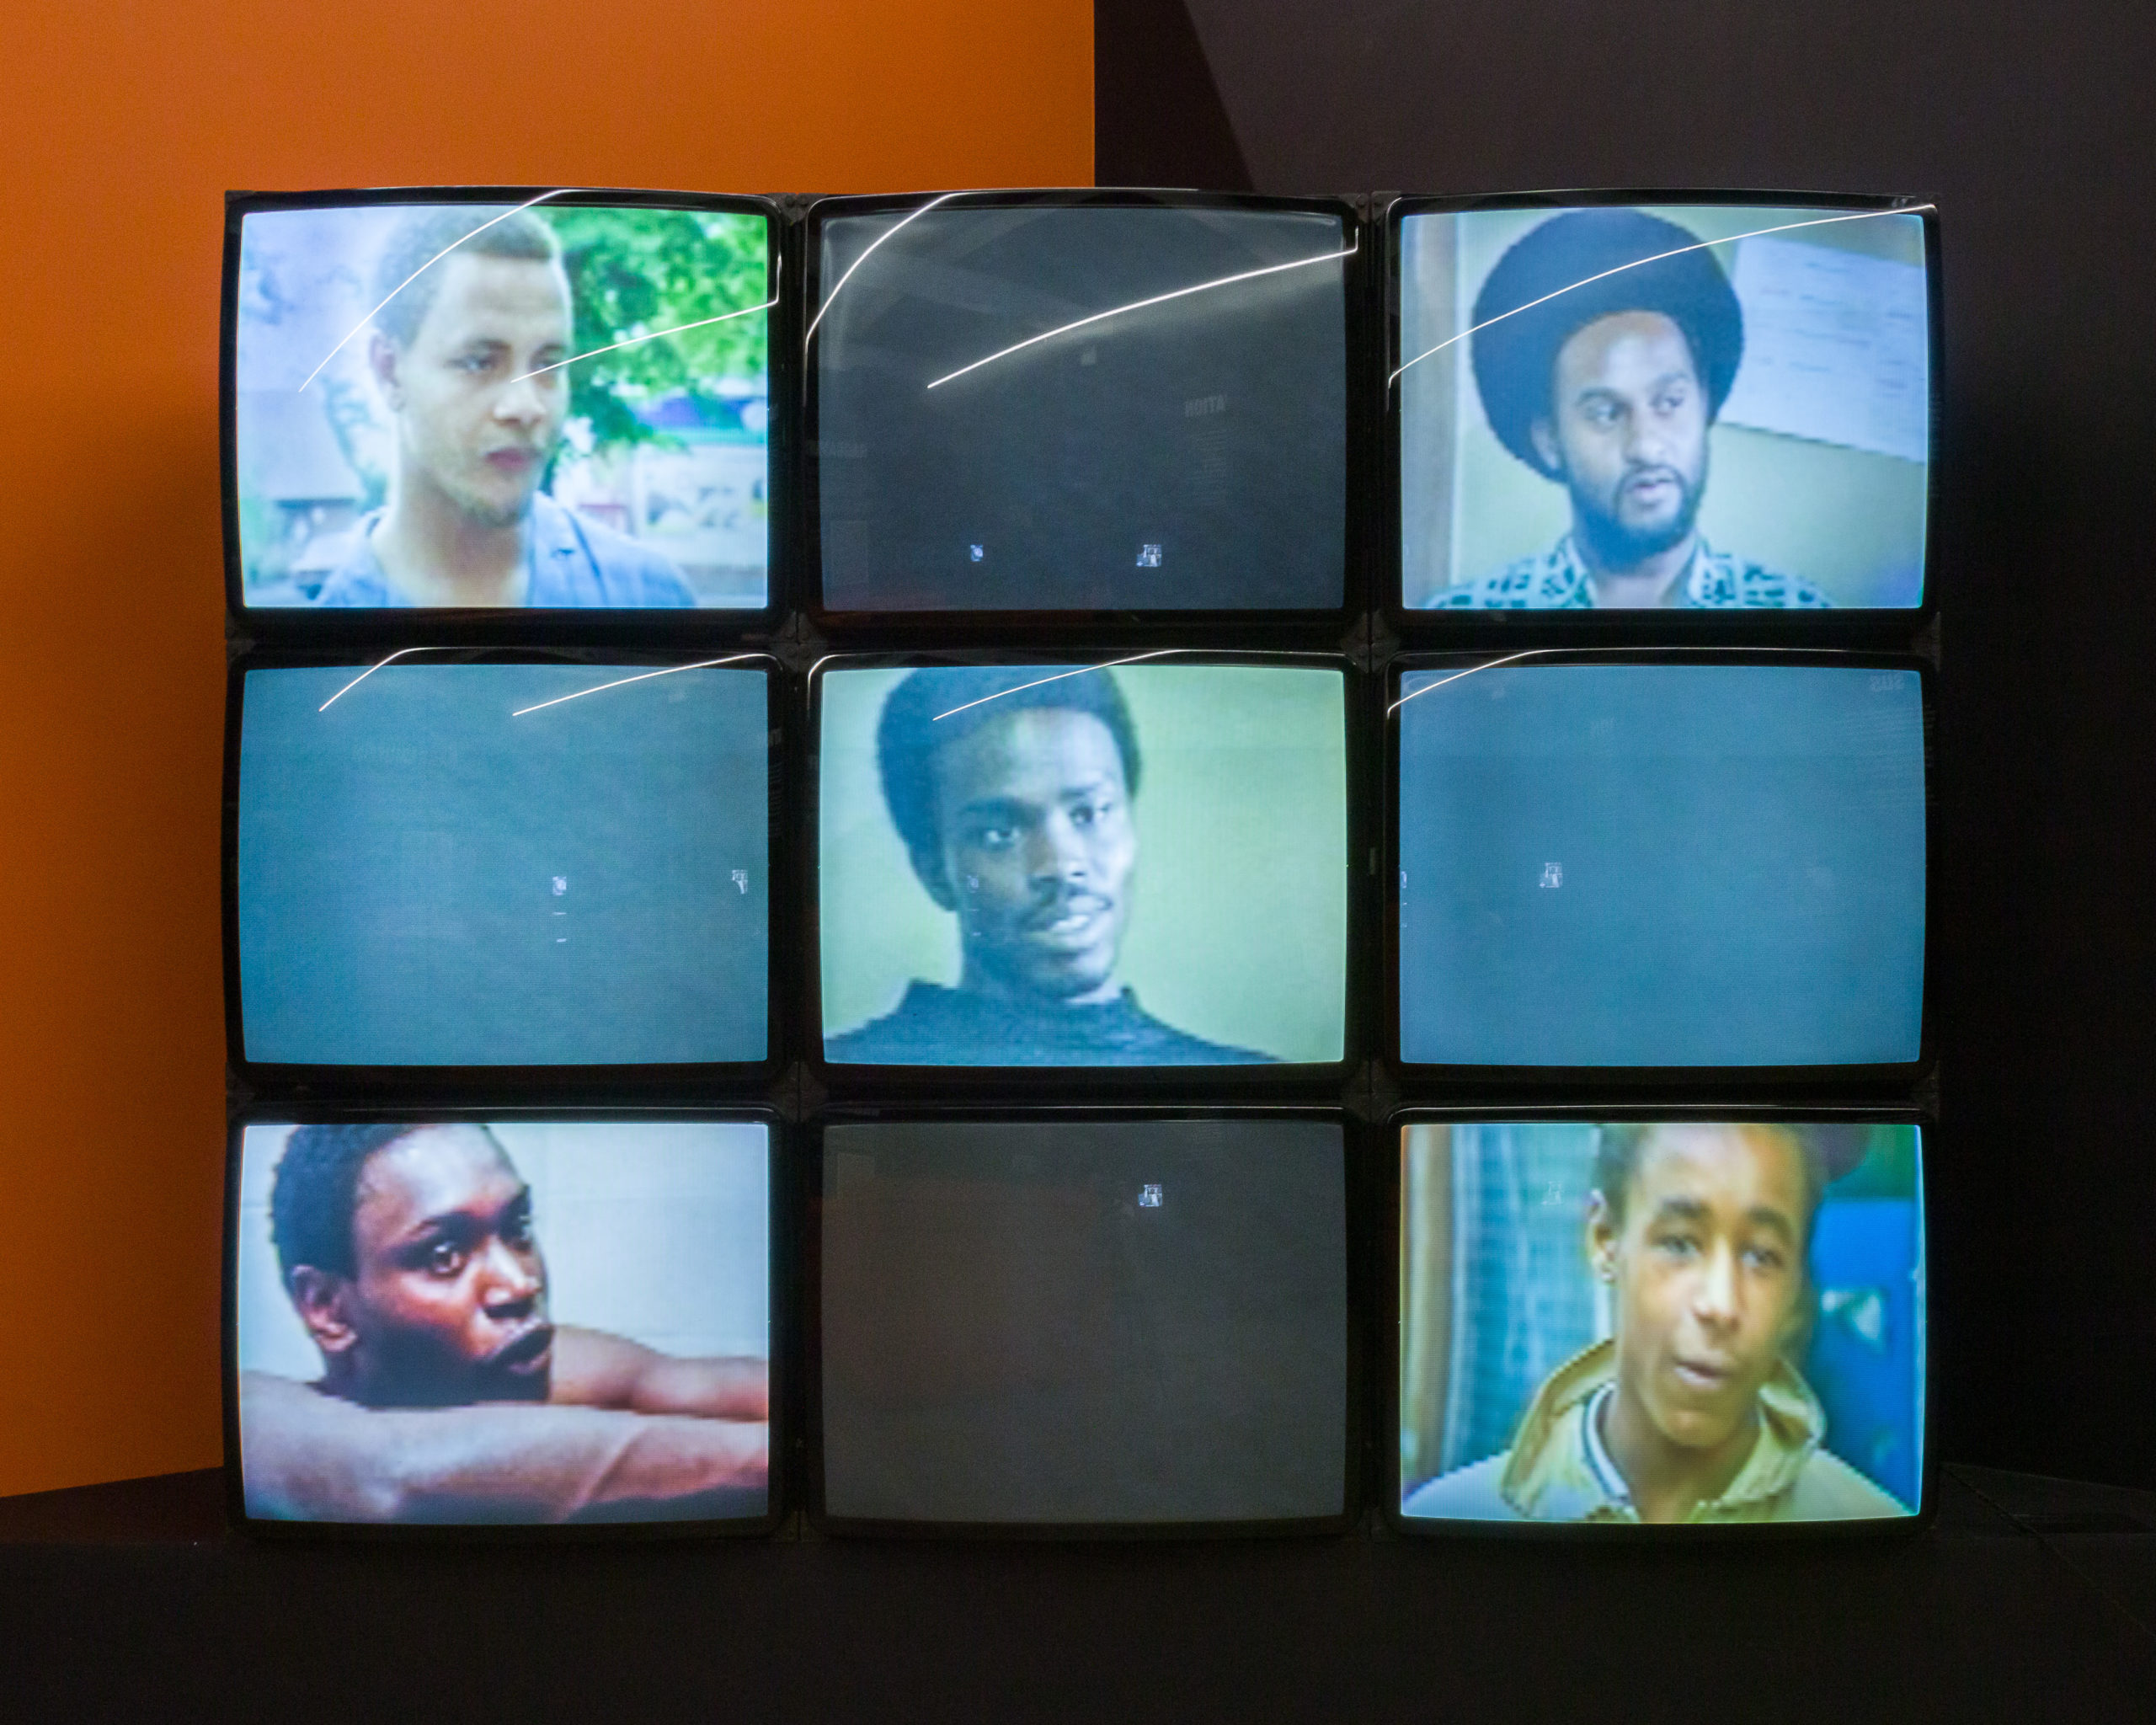 A 3x3 set of screens placed edge to edge. Photo portraits are displayed on the five screens: the one in the middle and the four in the corners.